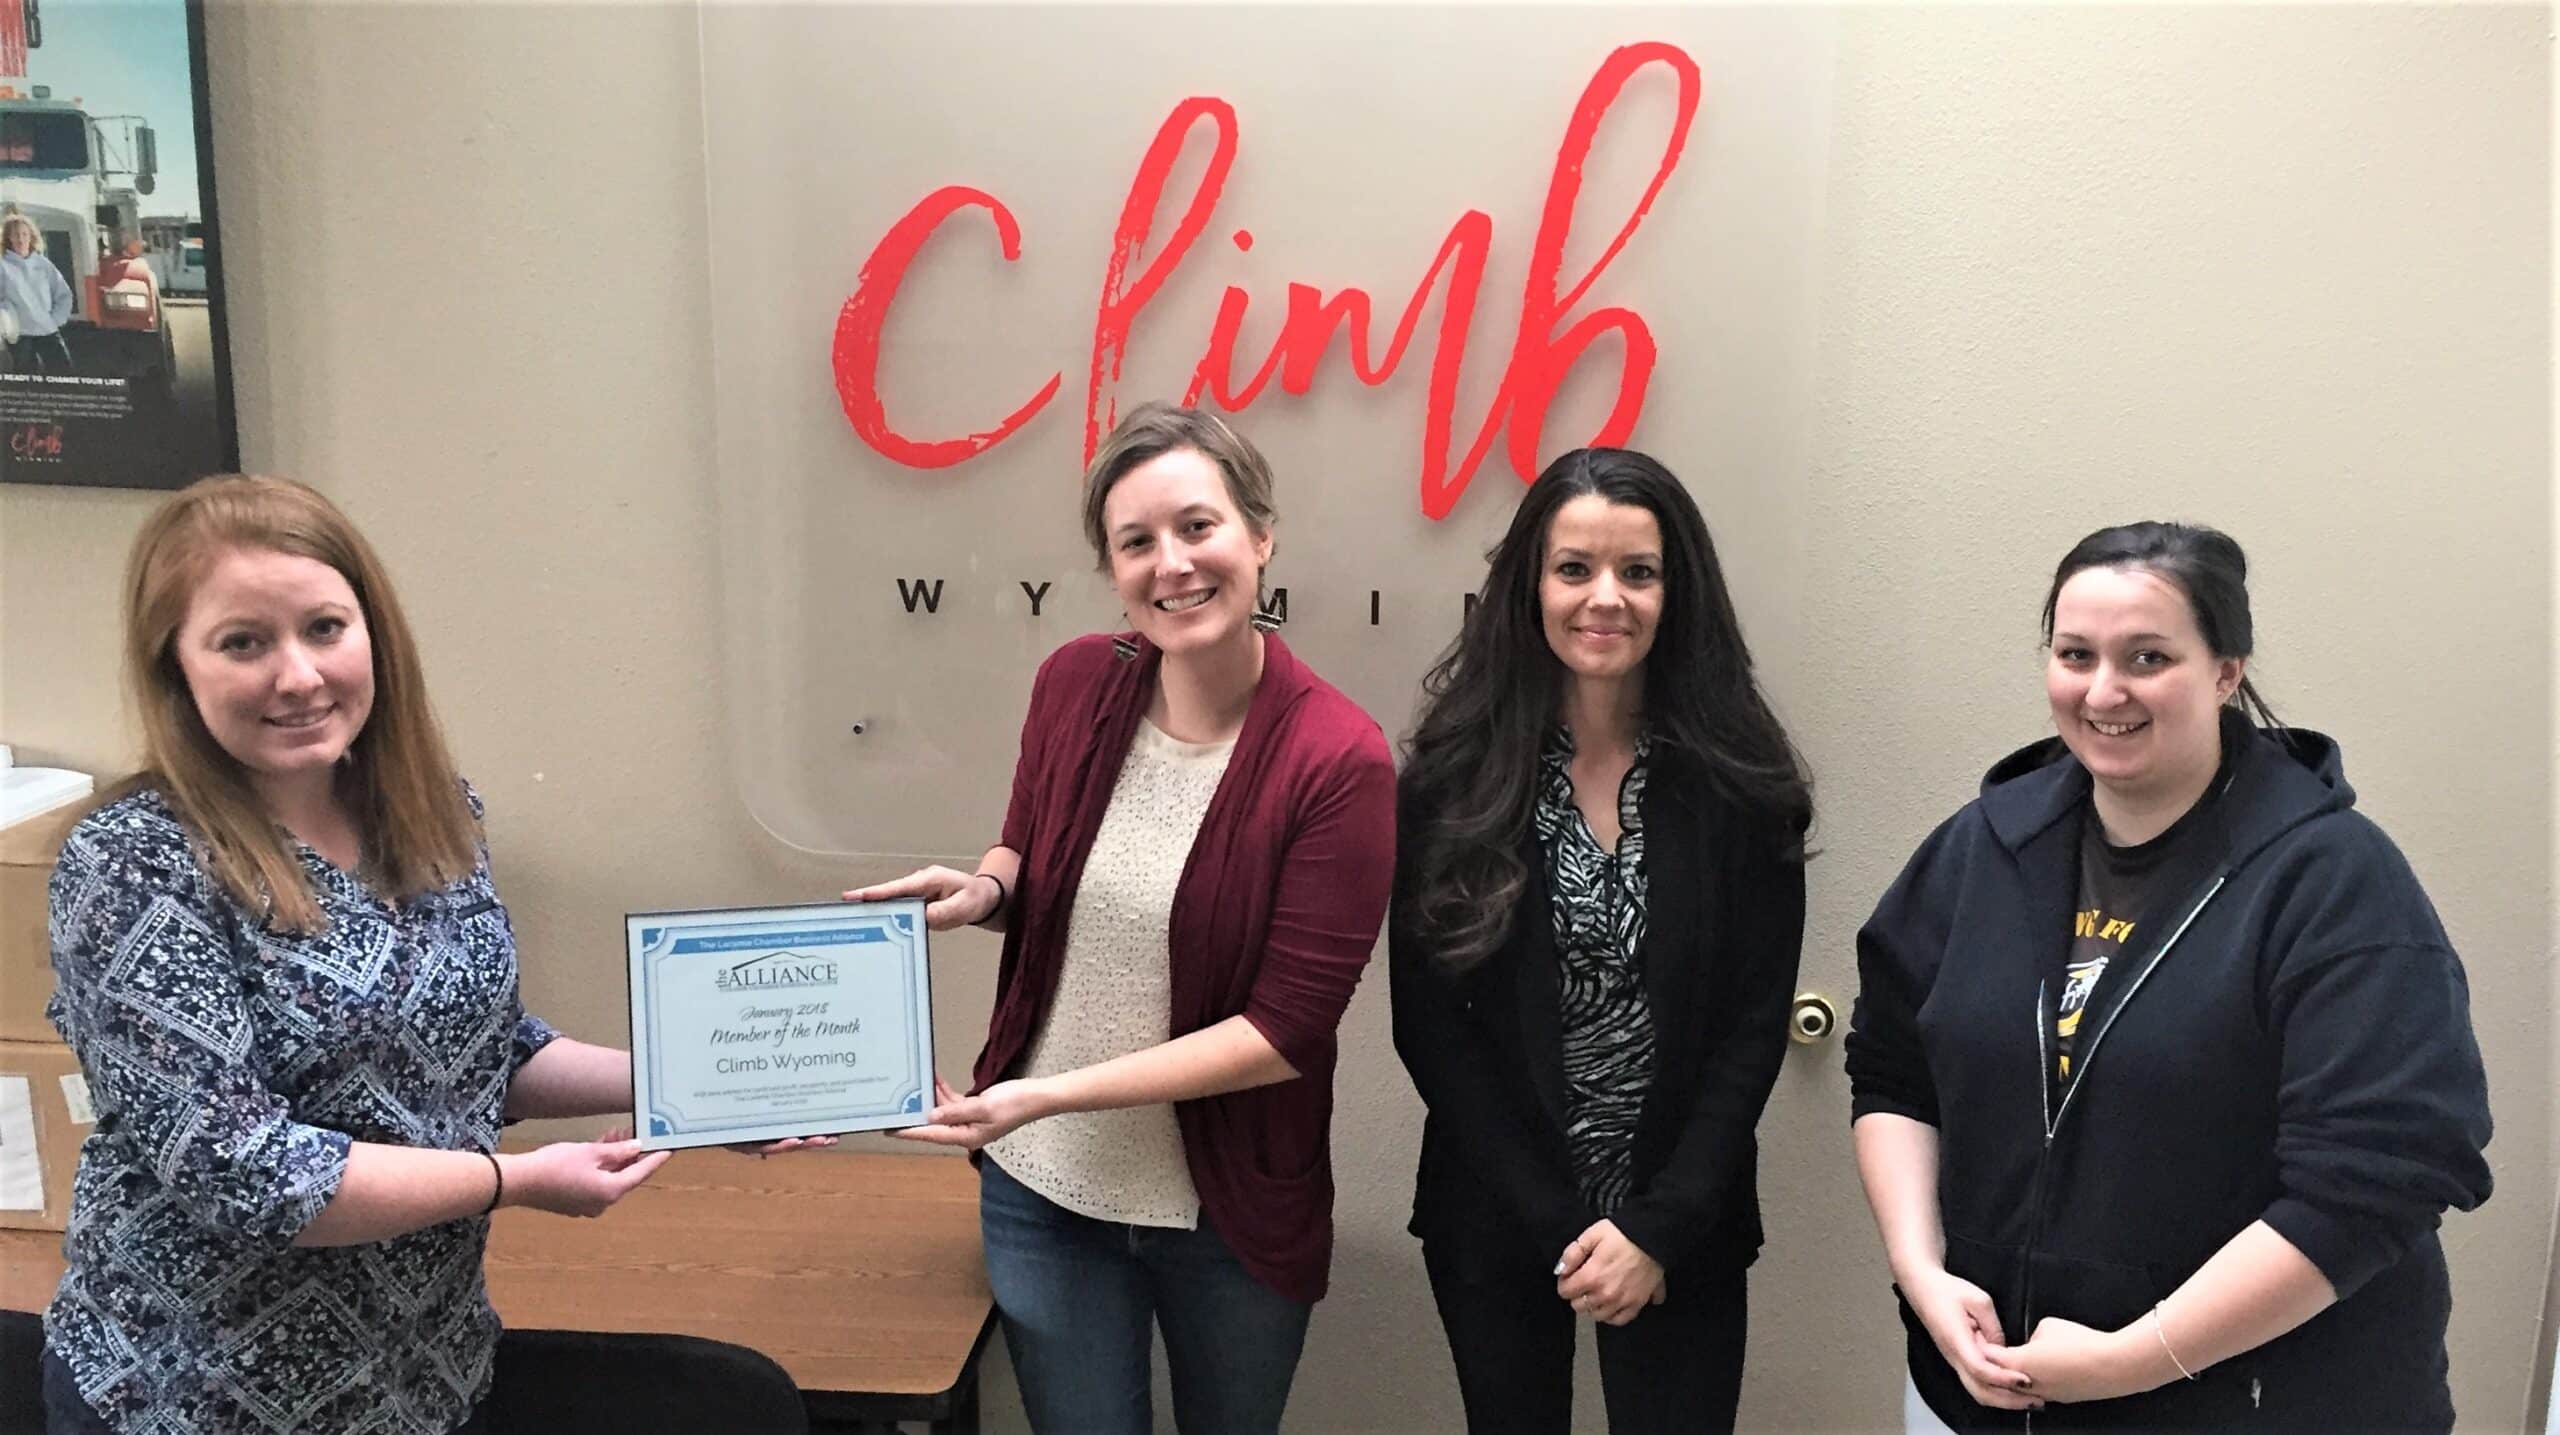 JANUARY BUSINESS OF THE MONTH: CLIMB WYOMING HELPING SINGLE MOMS, THE ECONOMY